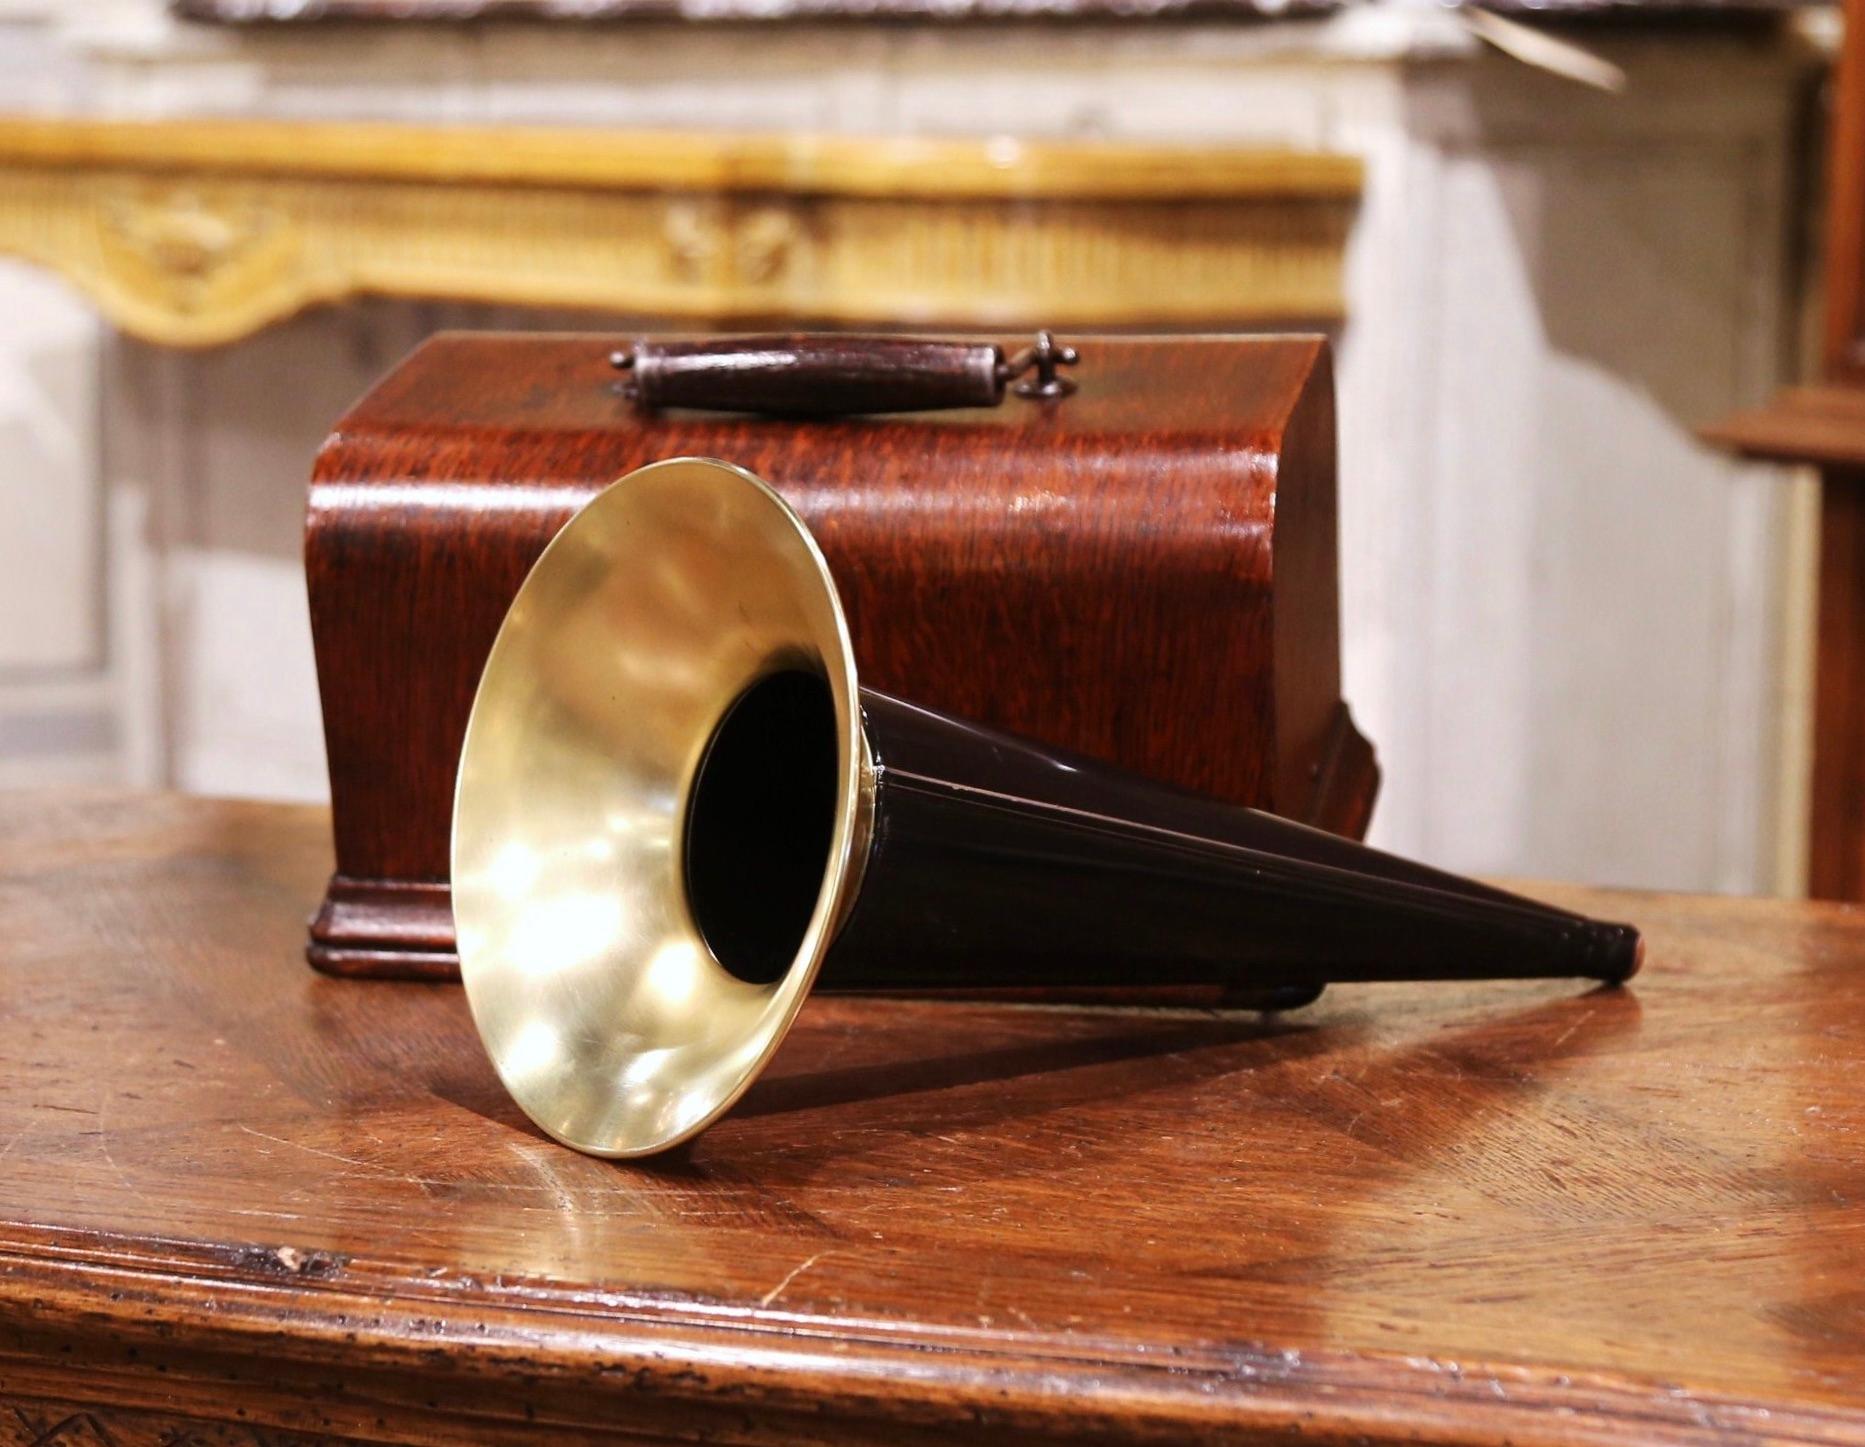 19th Century Graphophone by the Columbia Phonograph Co. with Casing and Rolls 6